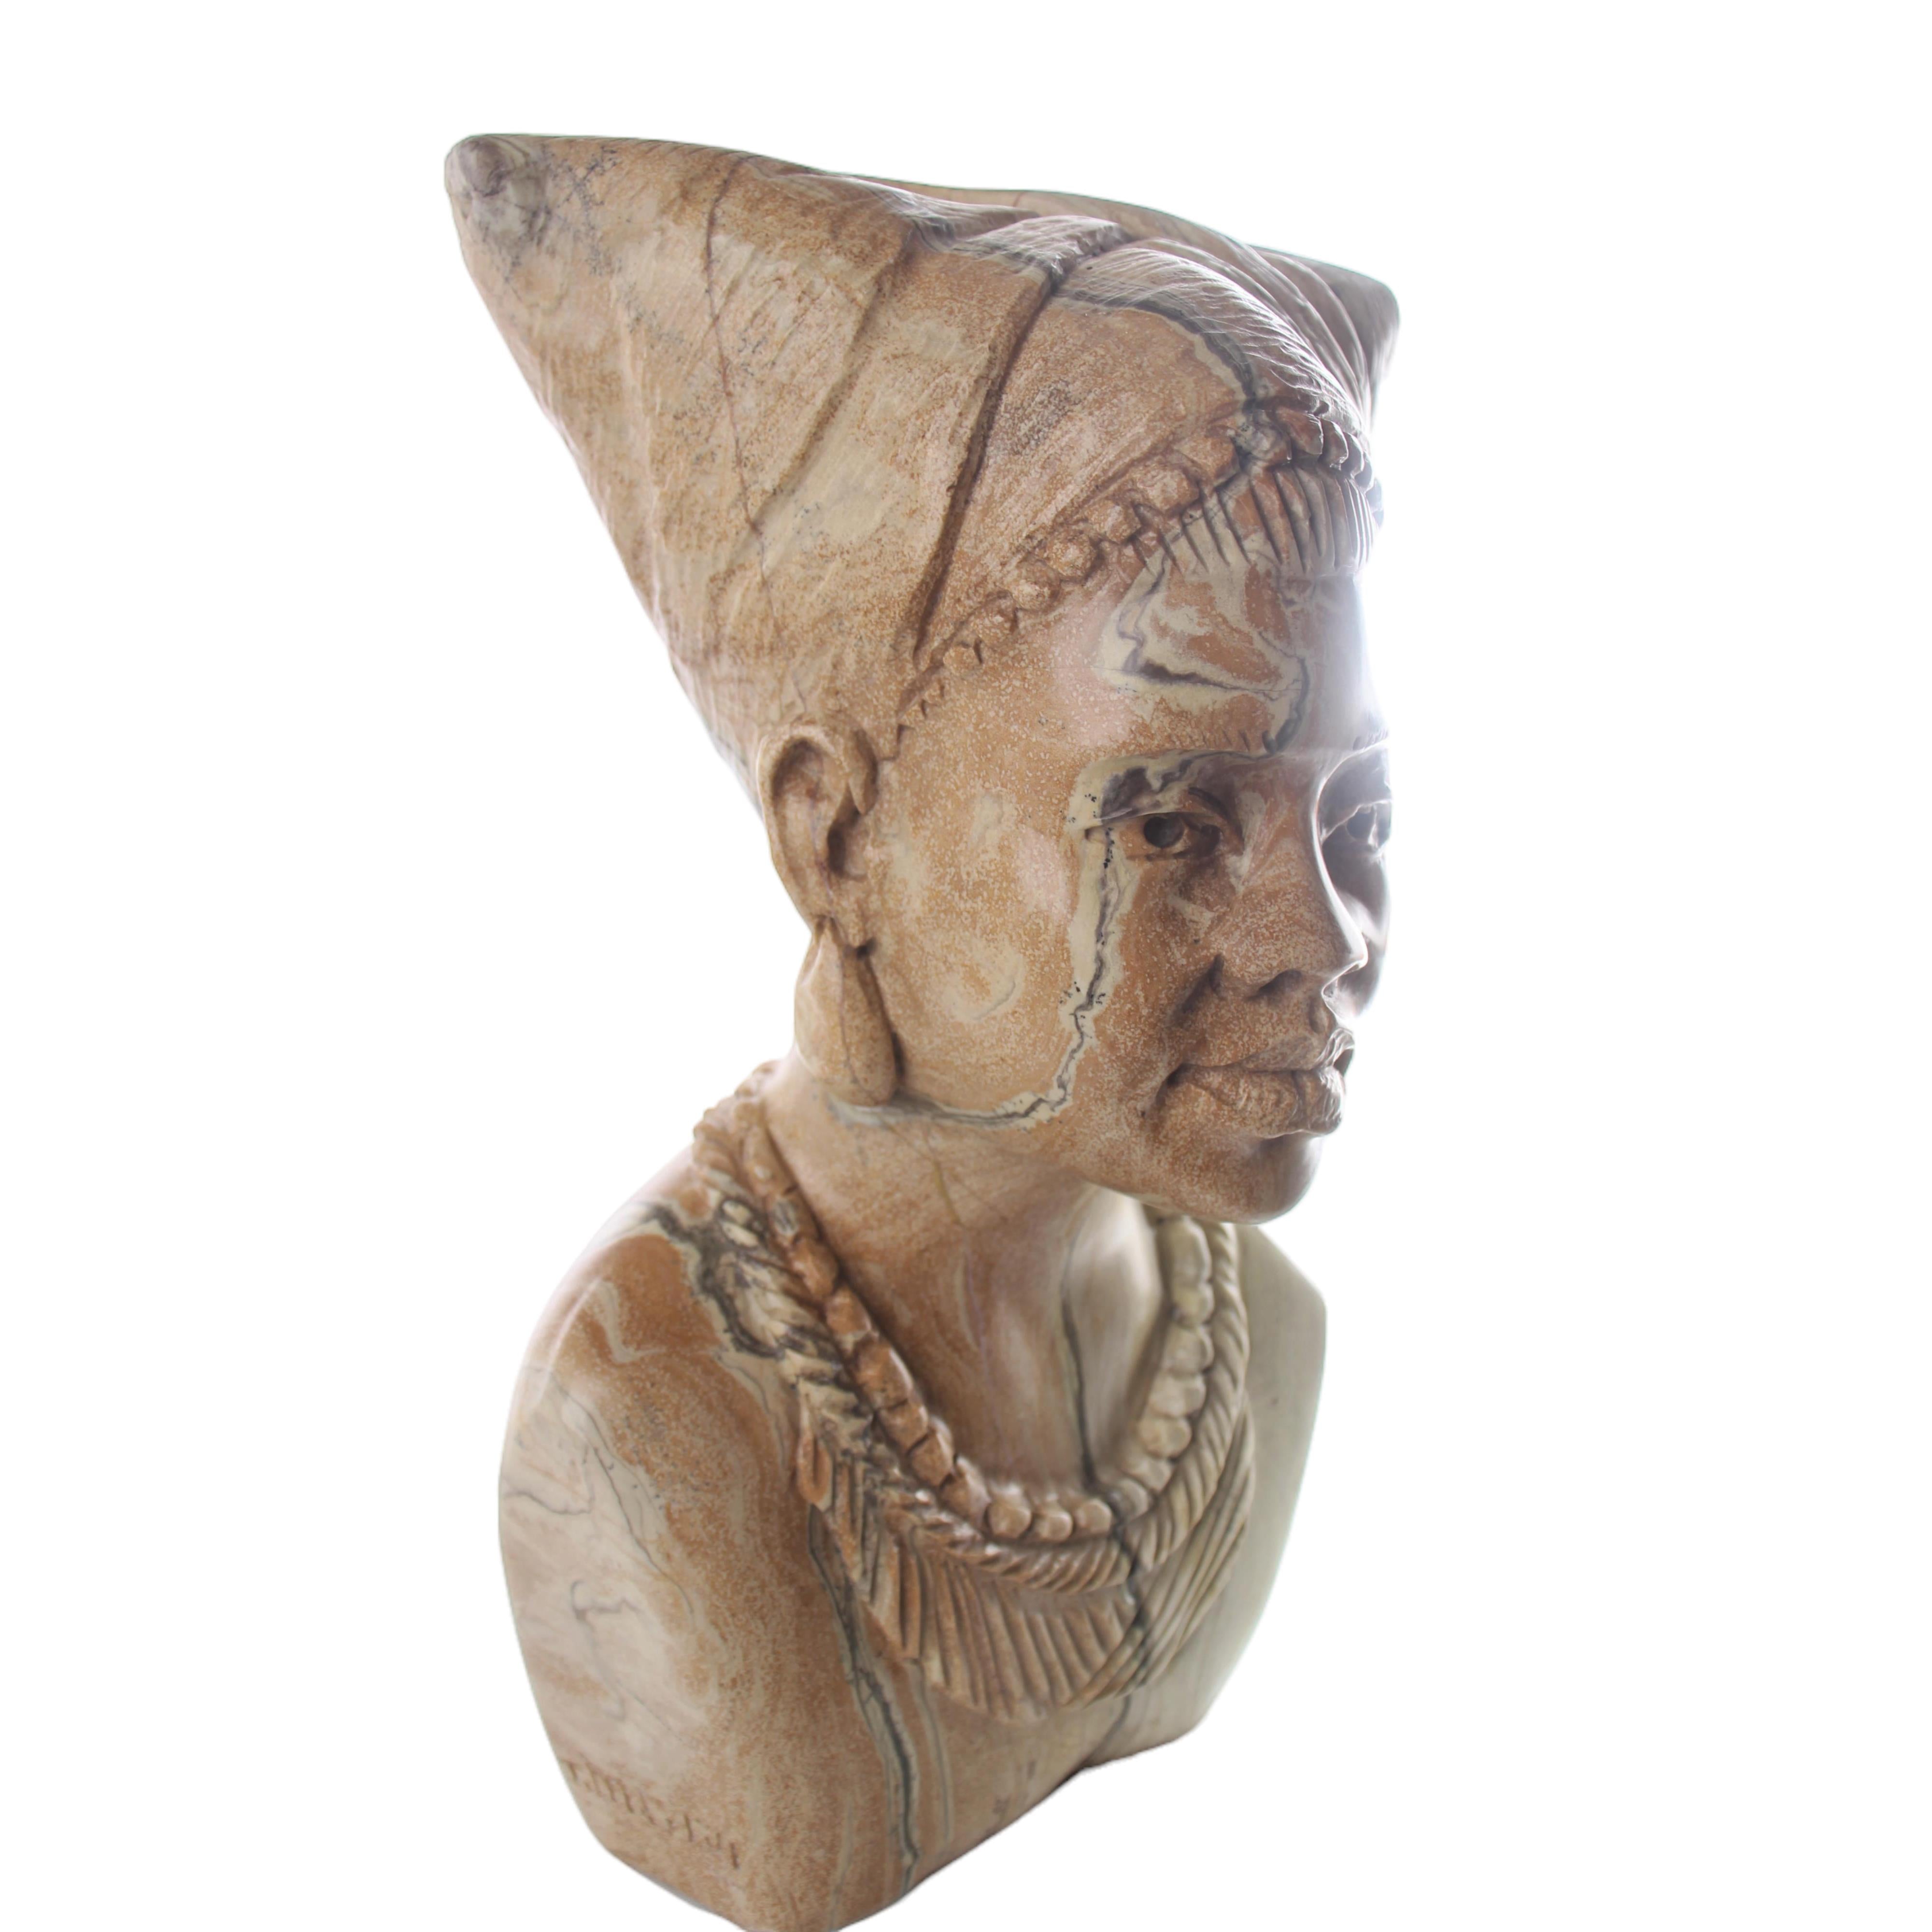 Shona Tribe Butter Jade Bust ~11.0" Tall - Busts